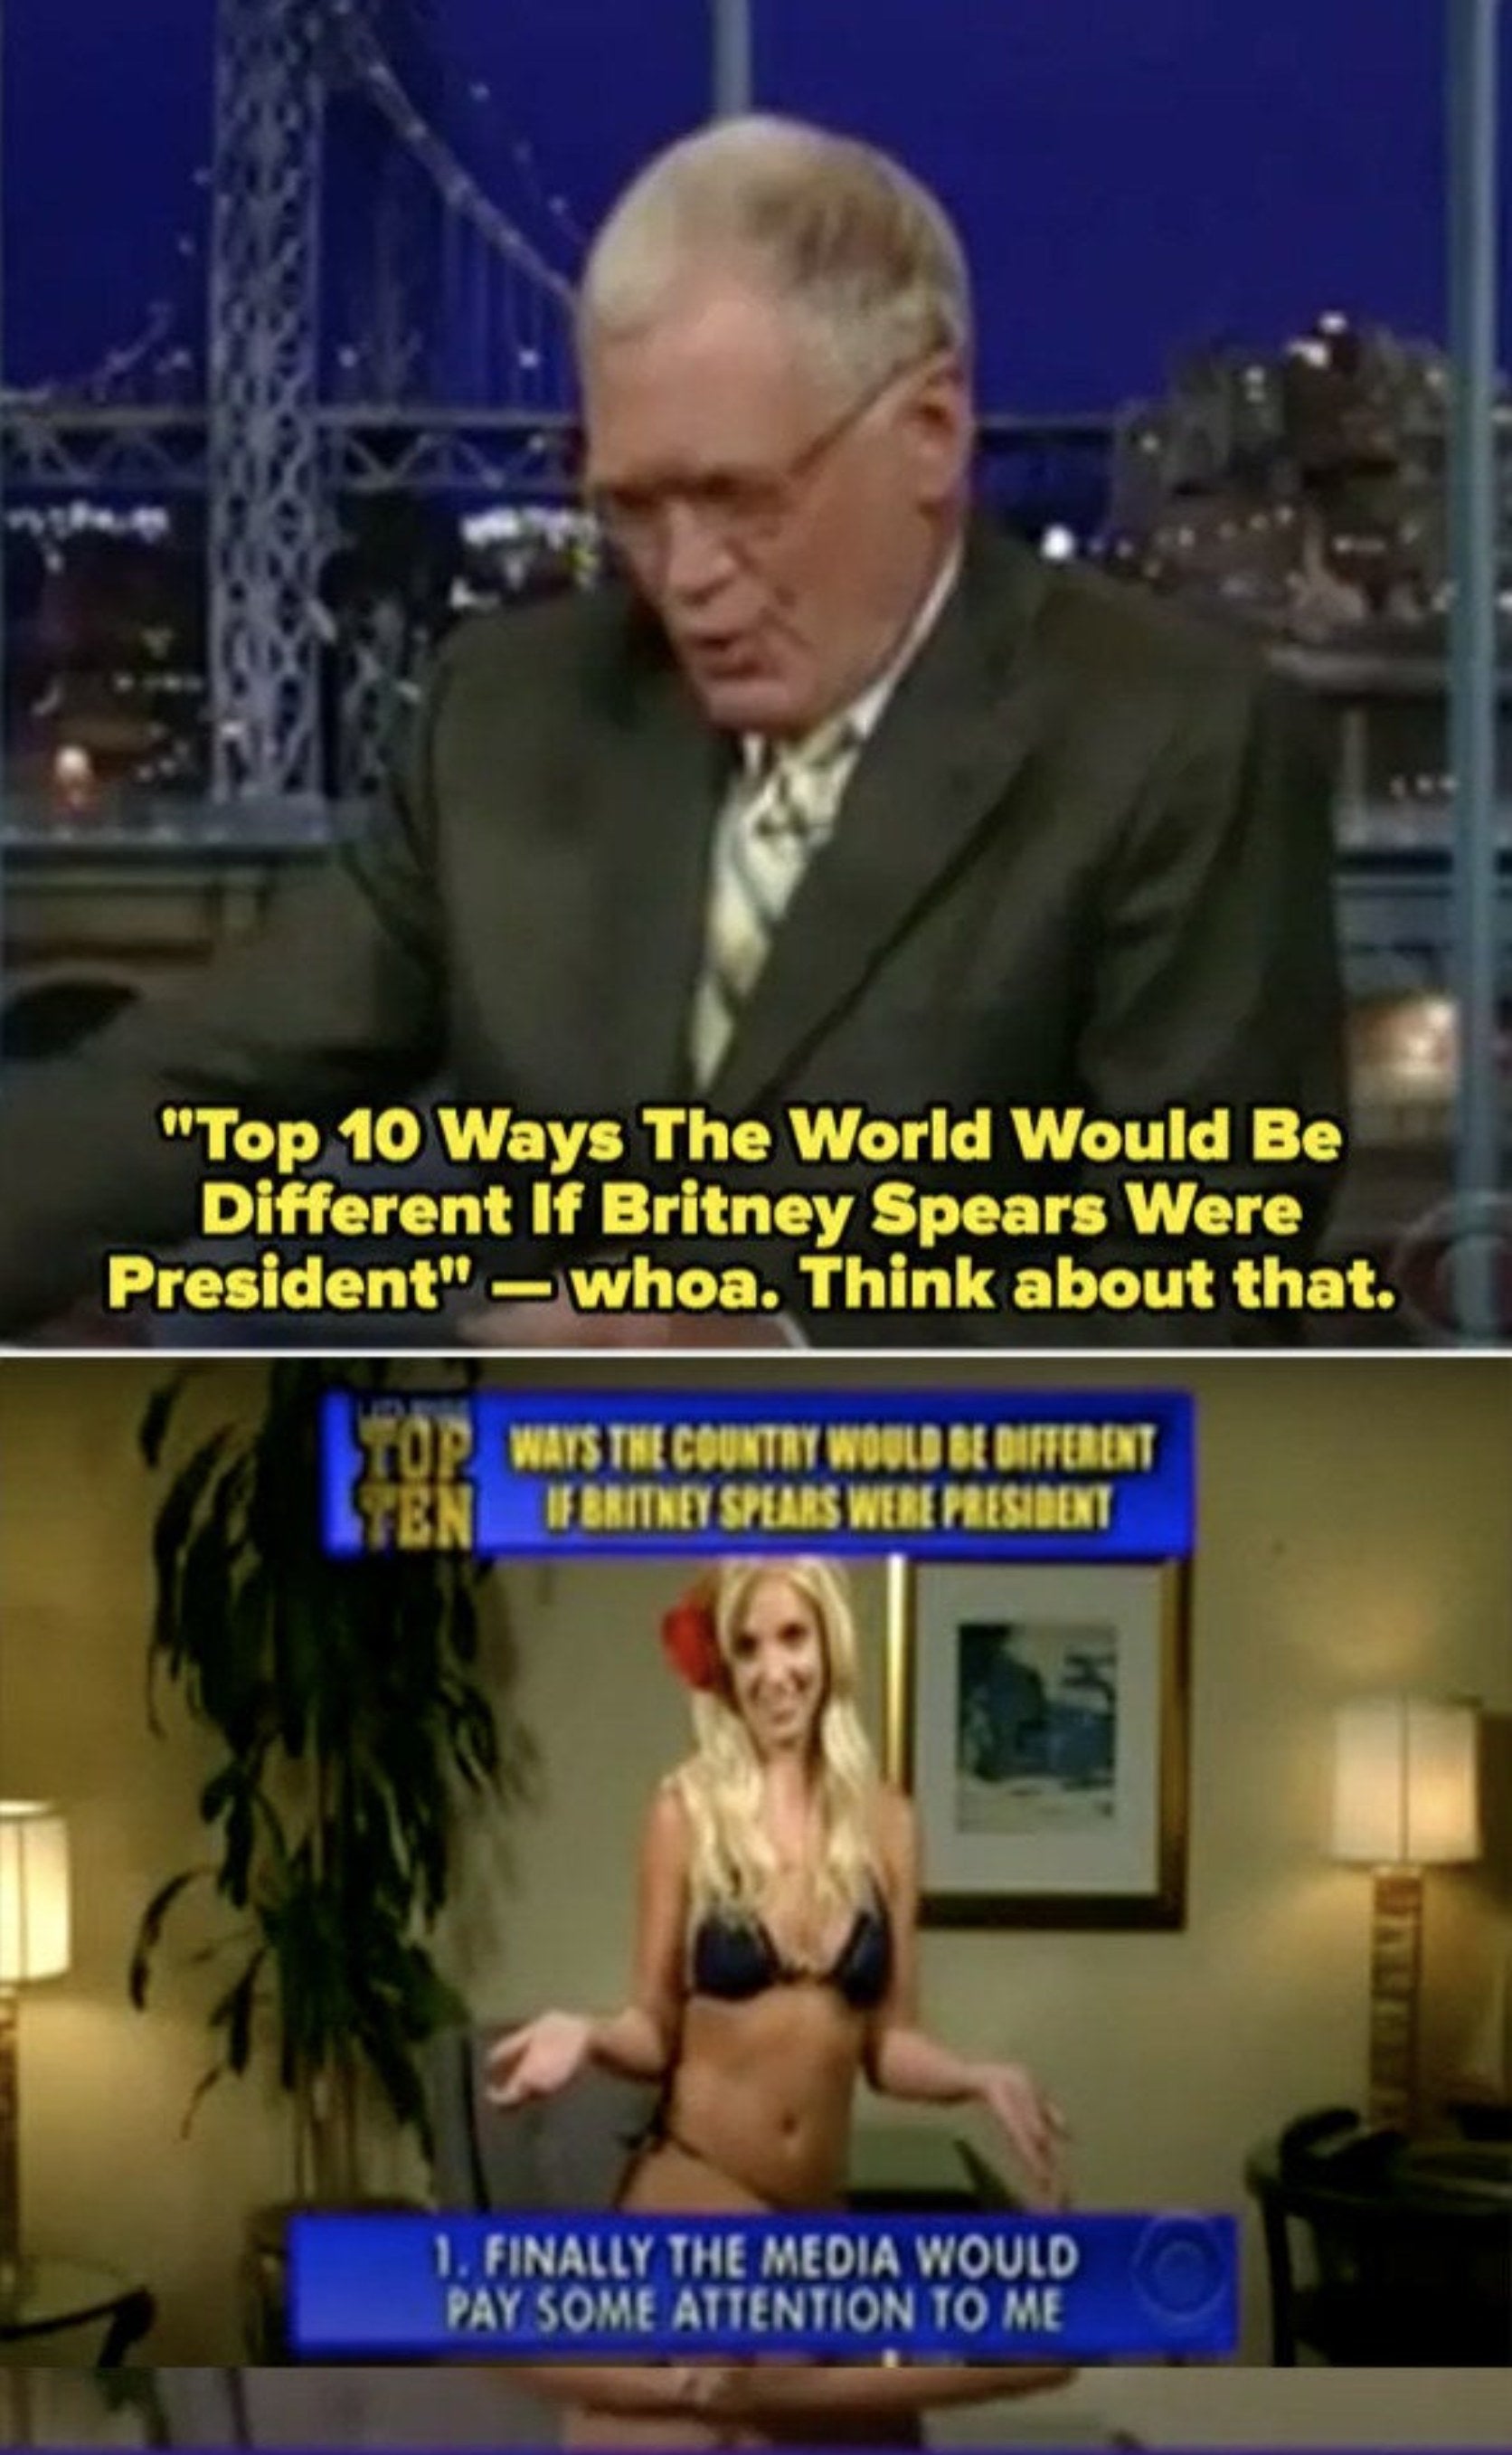 Britney Spears doing a segment where she reads her list of things that would be different if she was president and the number 1 on the the list is &quot;Finally the media would pay some attention to me&quot;